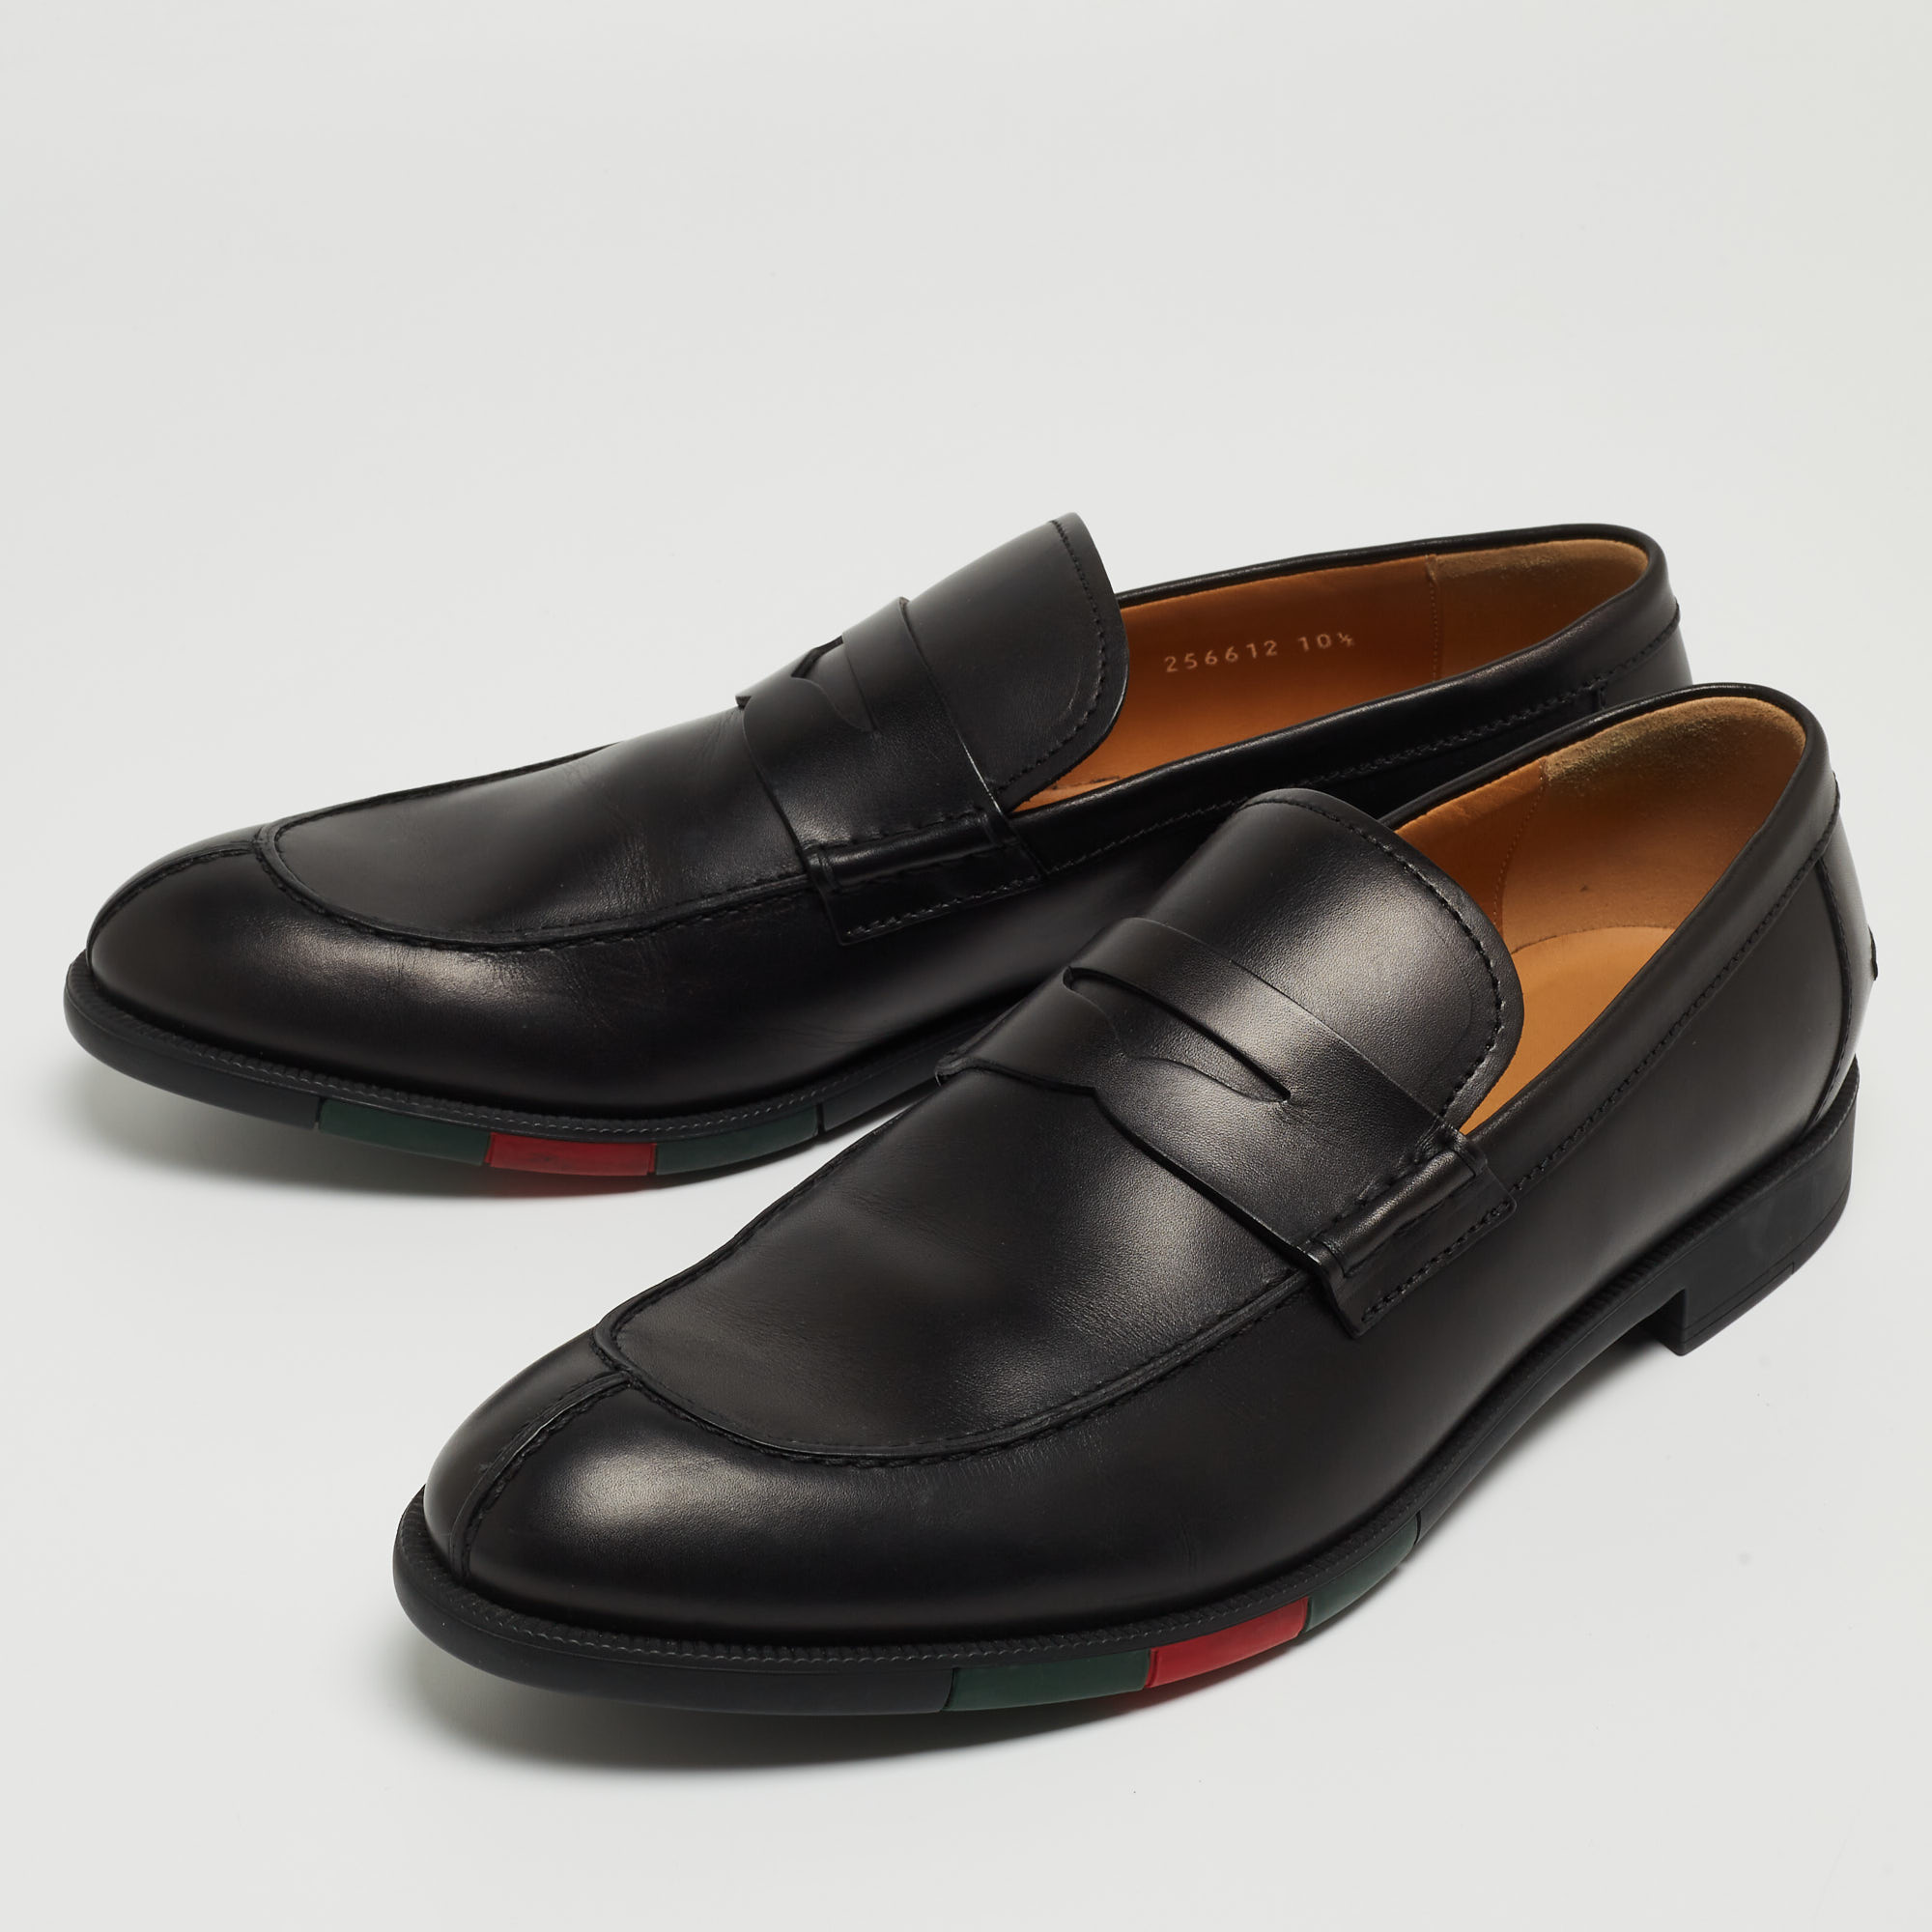 

Gucci Black Leather Penny Slip On Loafers Size